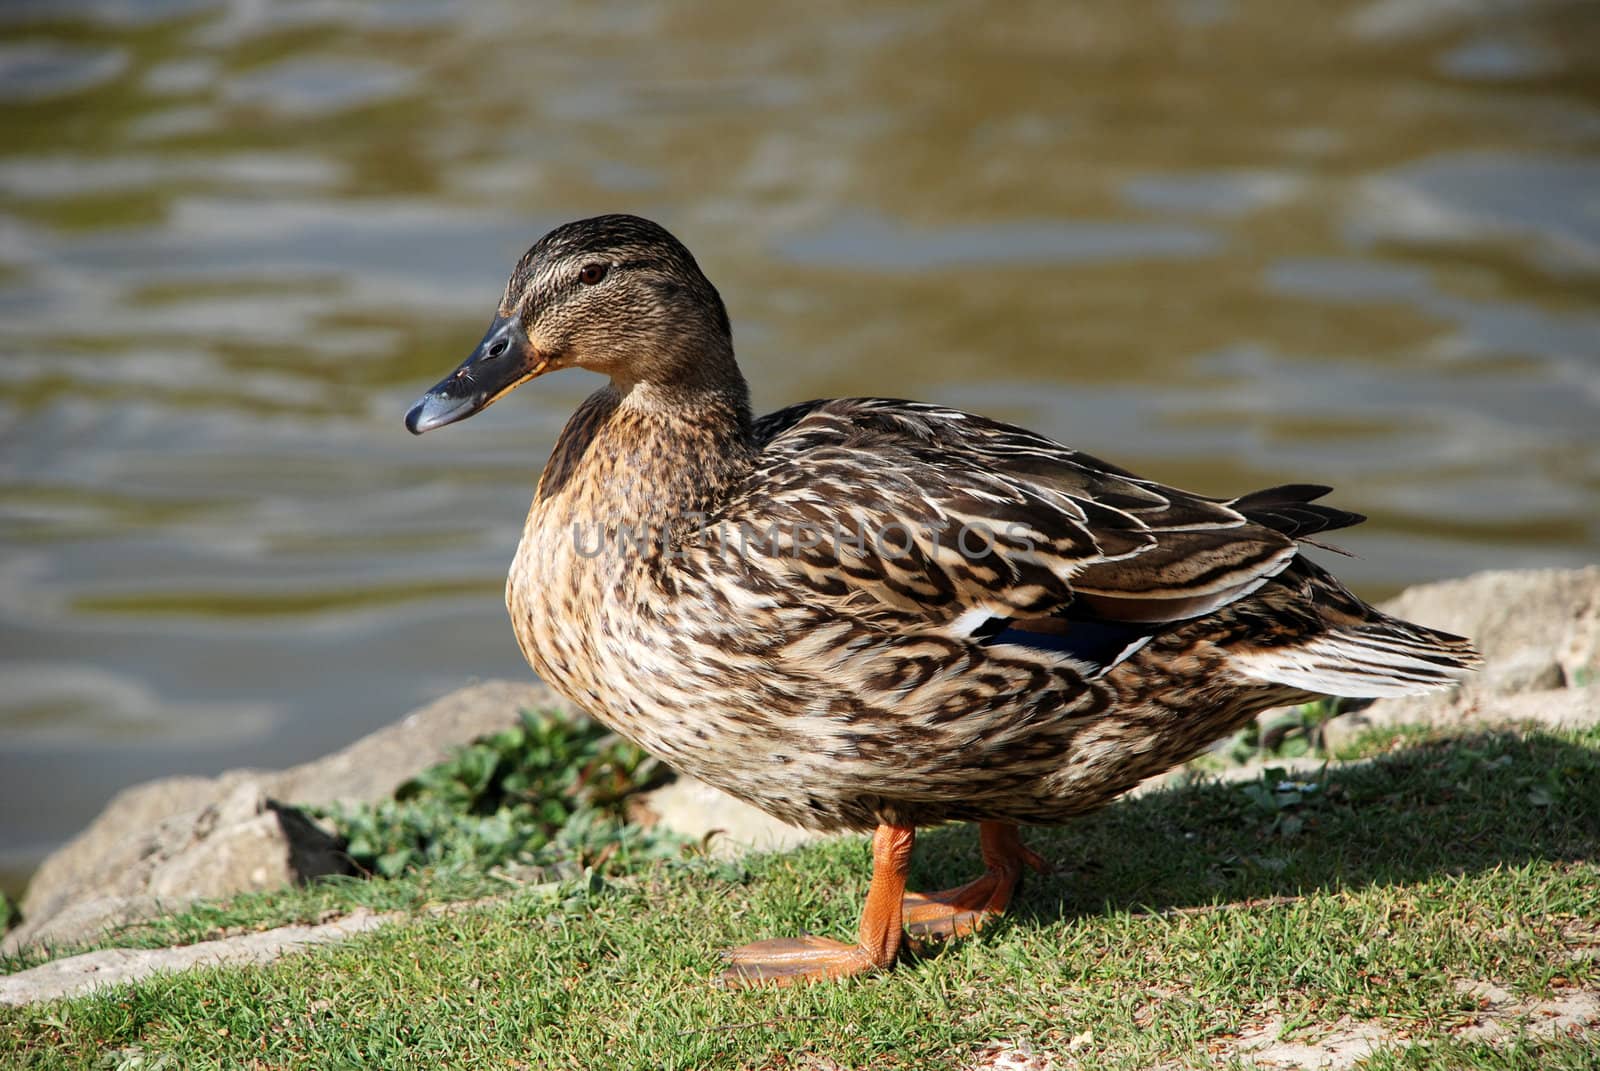 Female mallard duck standing on grass by the water's edge